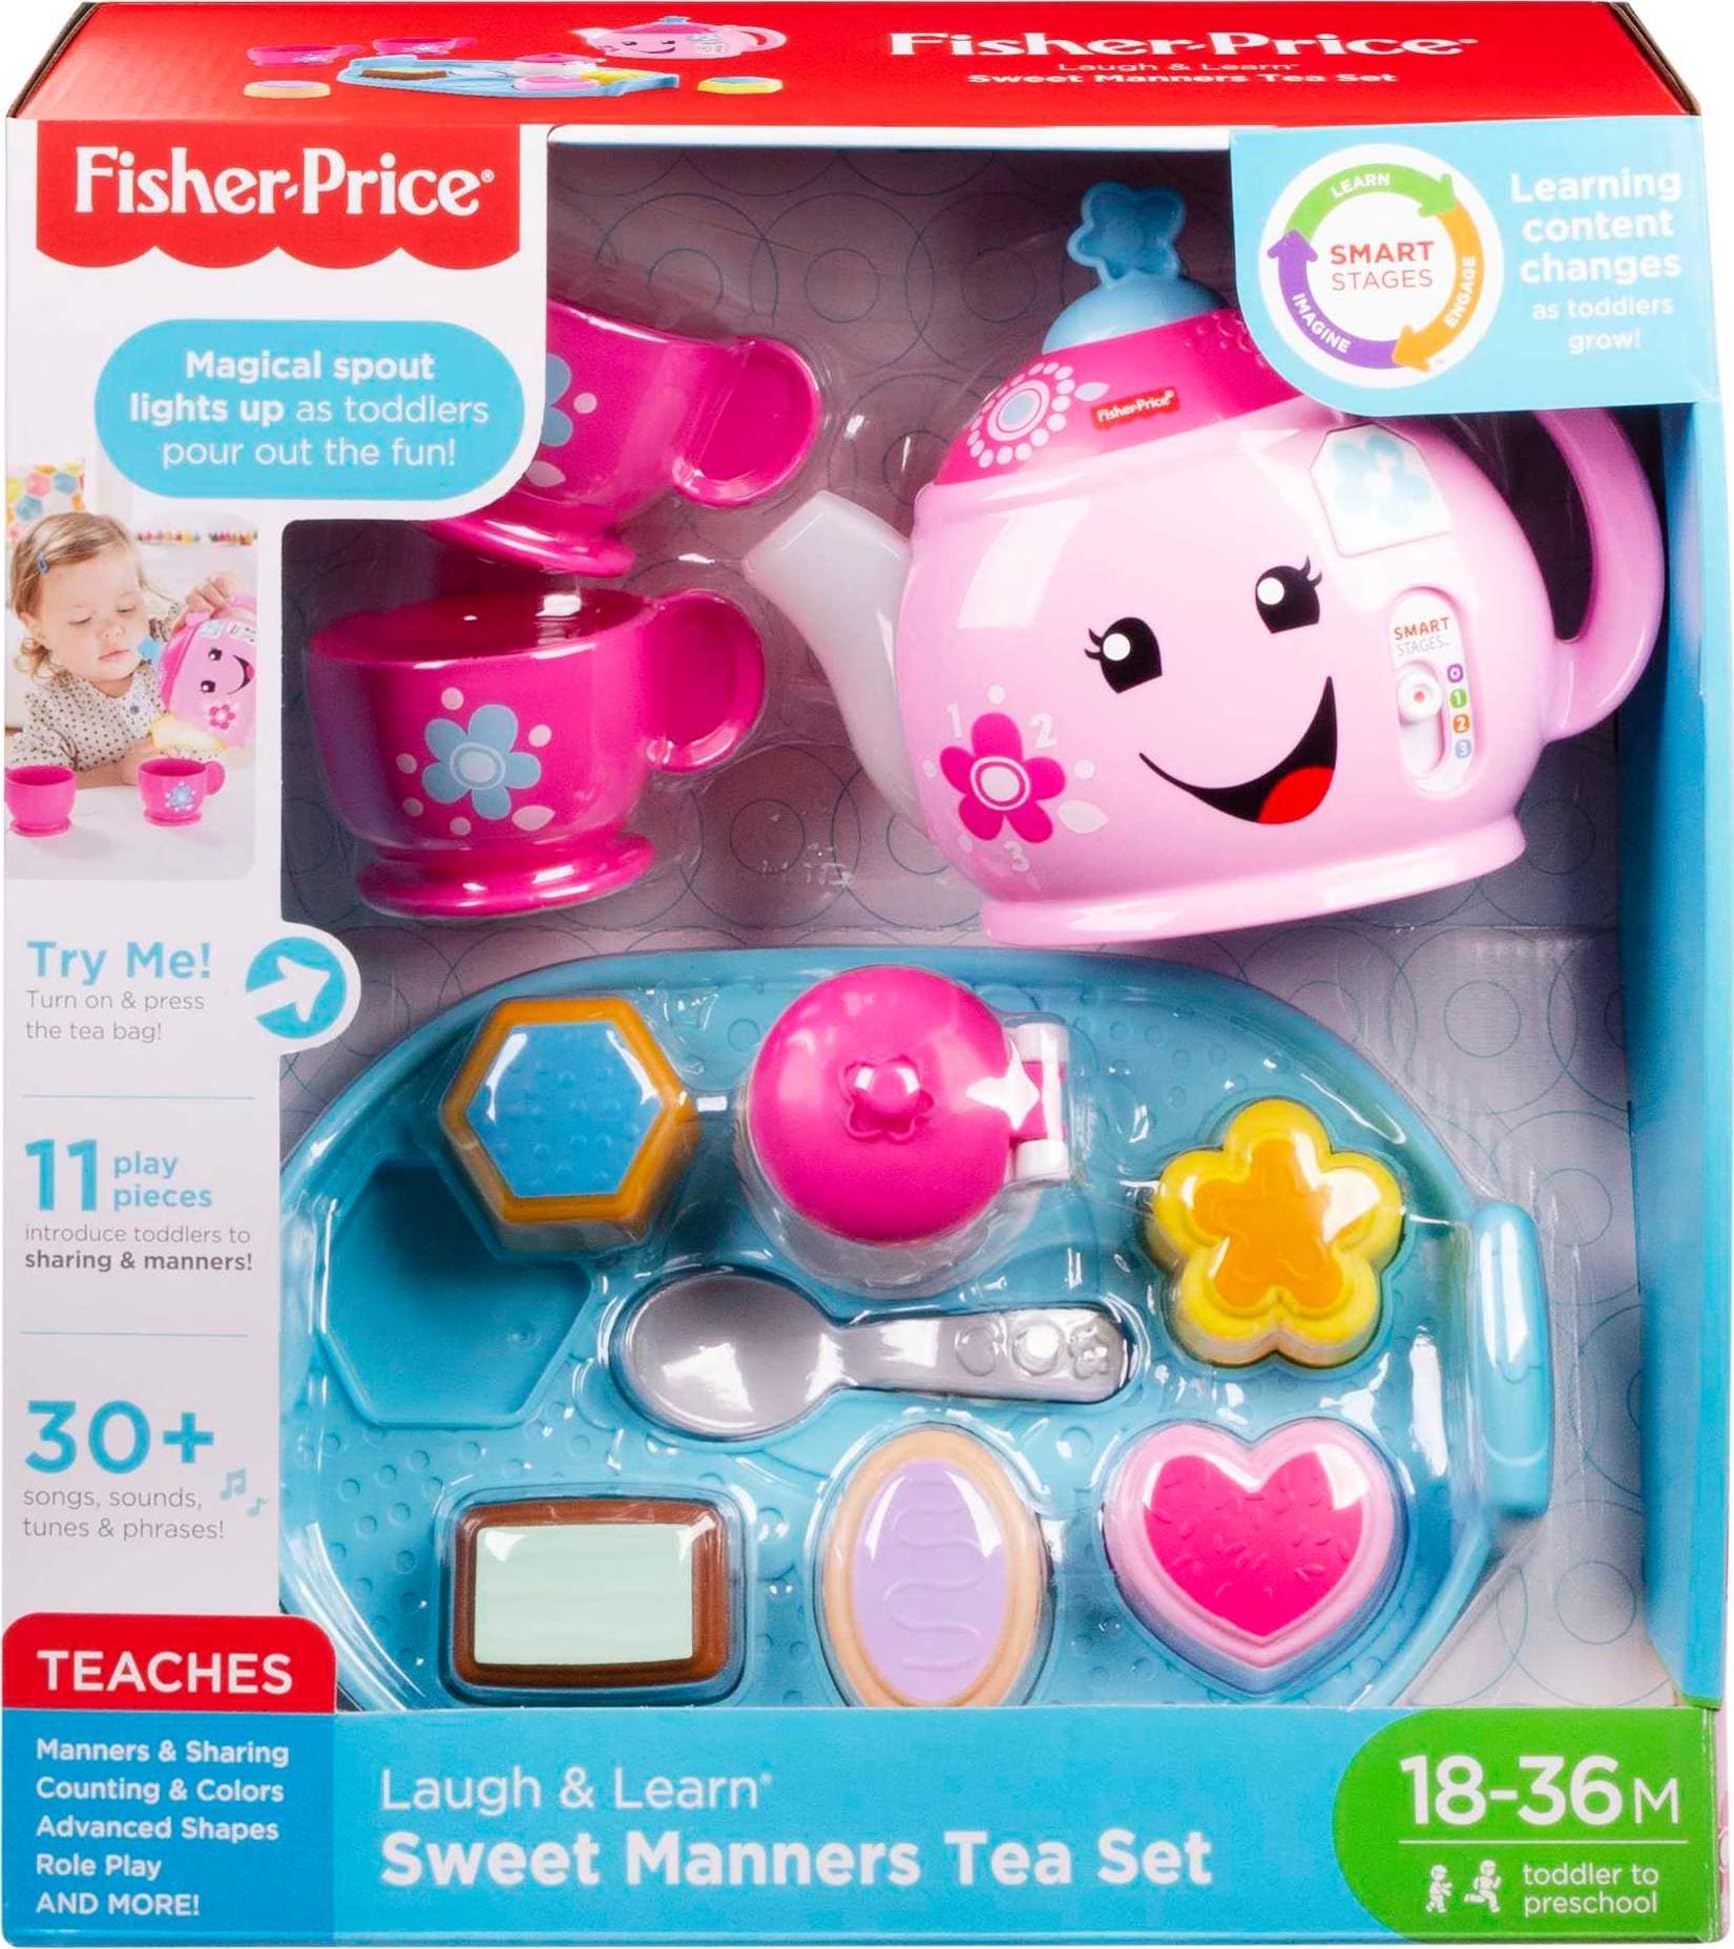 11-Piece Fisher-Price Toddler Laugh & Learn Sweet Manners Tea Set w/ 30+ Songs, Sounds & Phrases $12.75 + Free Shipping w/ Prime or on $35+